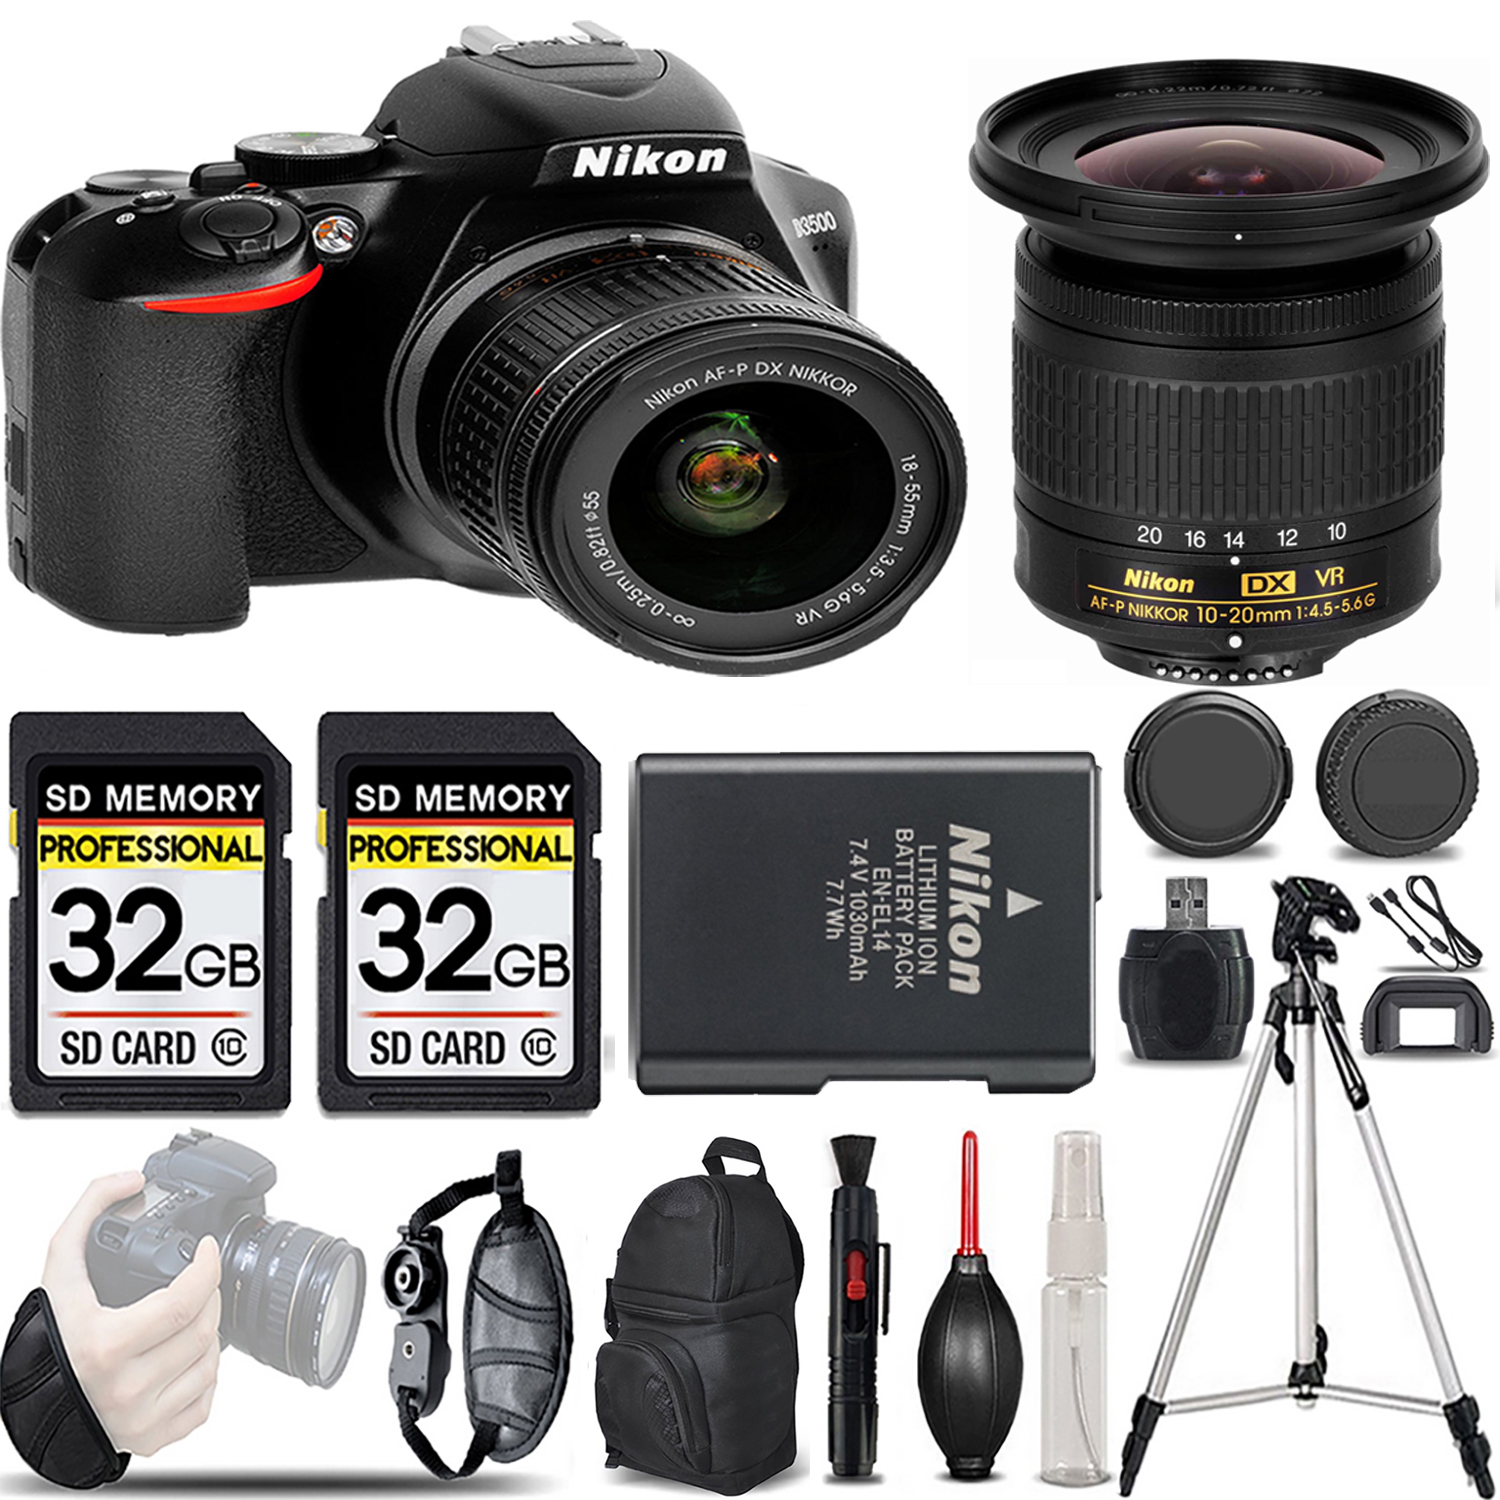 D3500 DSLR Camera with 18-55mm Lens + 10-20mm f/4.5-5.6G Lens - LOADED KIT *FREE SHIPPING*